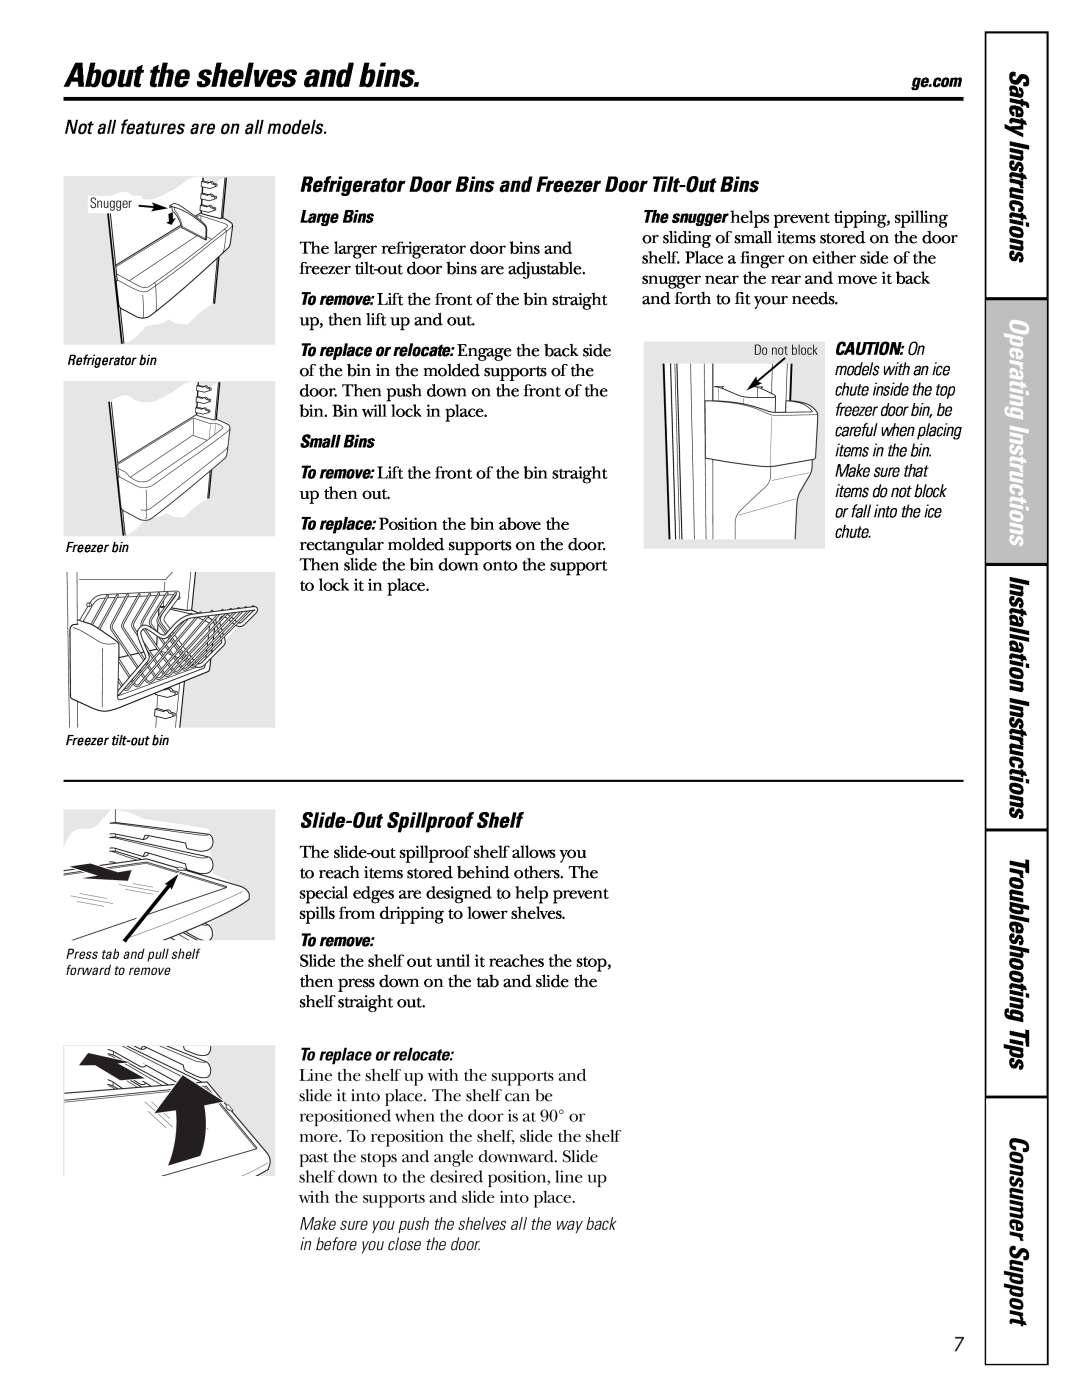 GE 25 and 27 installation instructions About the shelves and bins, Safety, Slide-OutSpillproof Shelf 